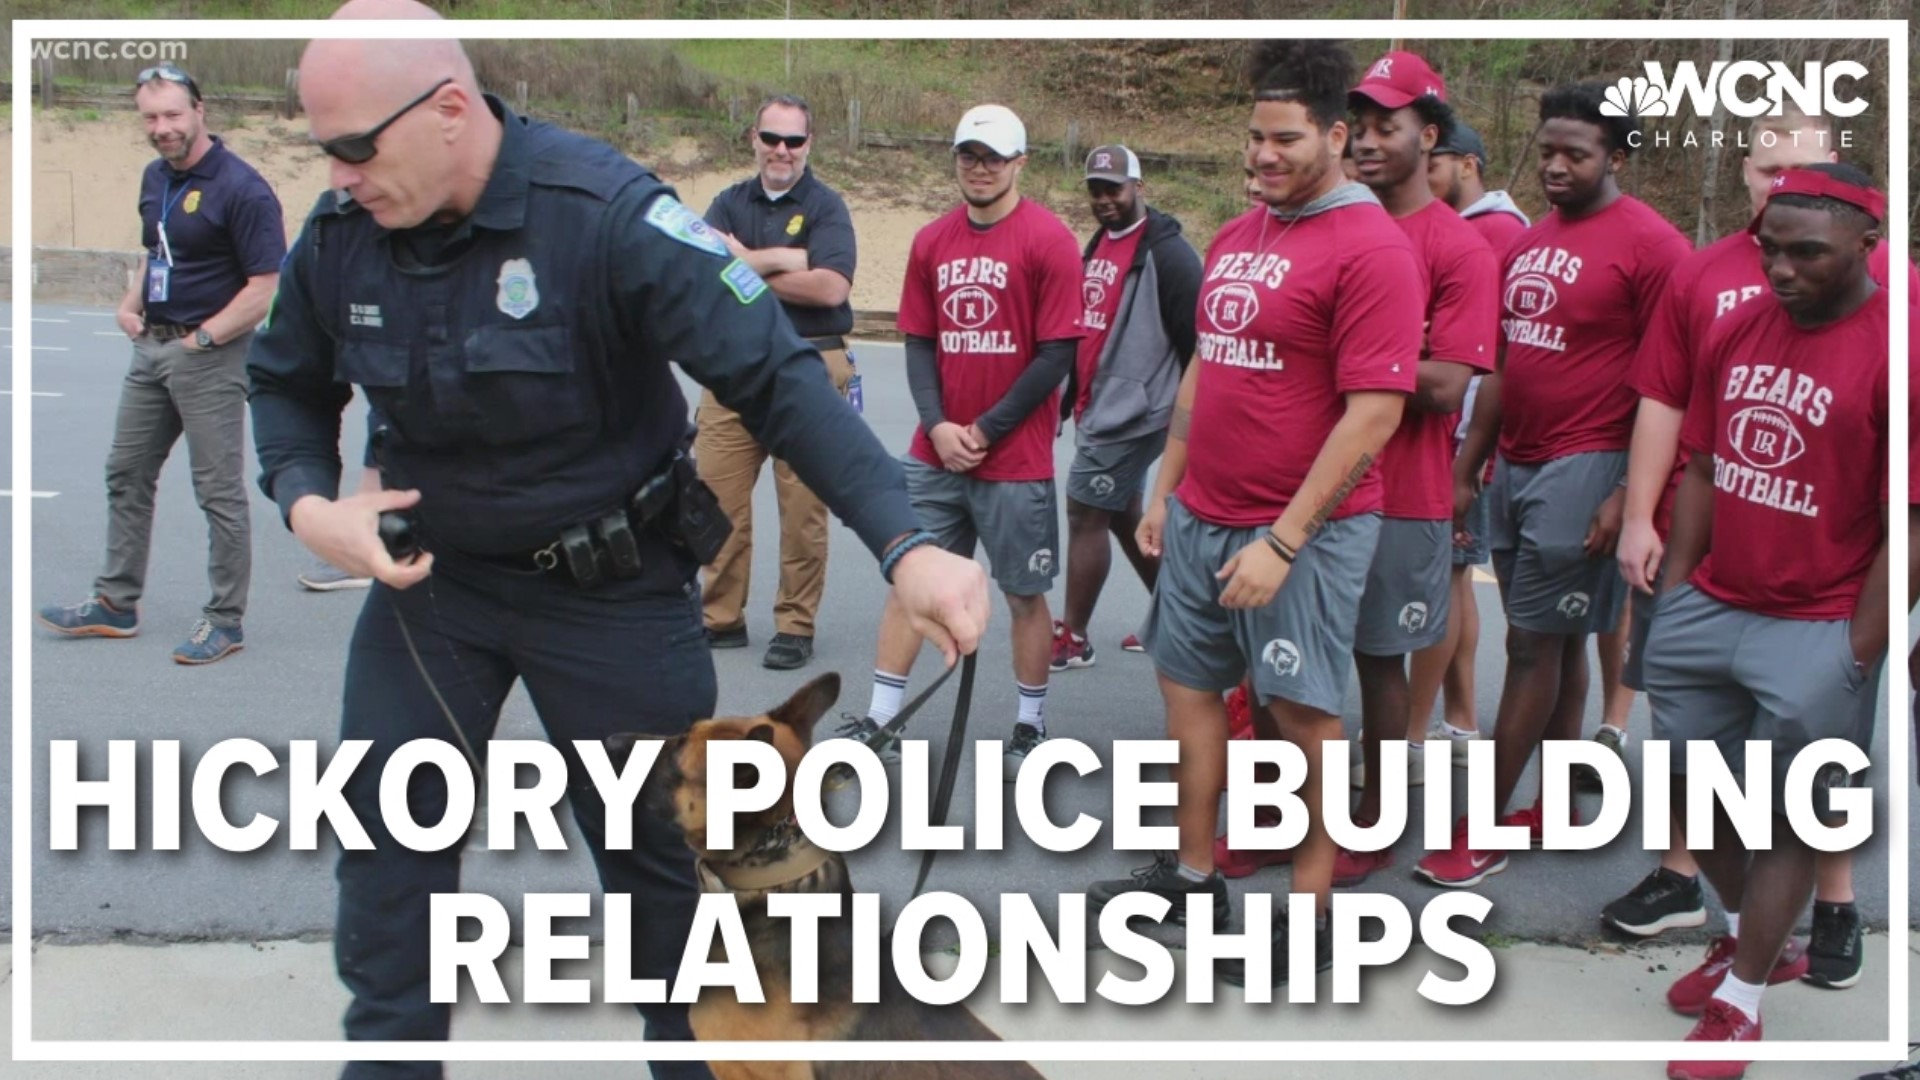 As different police forces aim to build community relationsips, one department is taking a new approach.